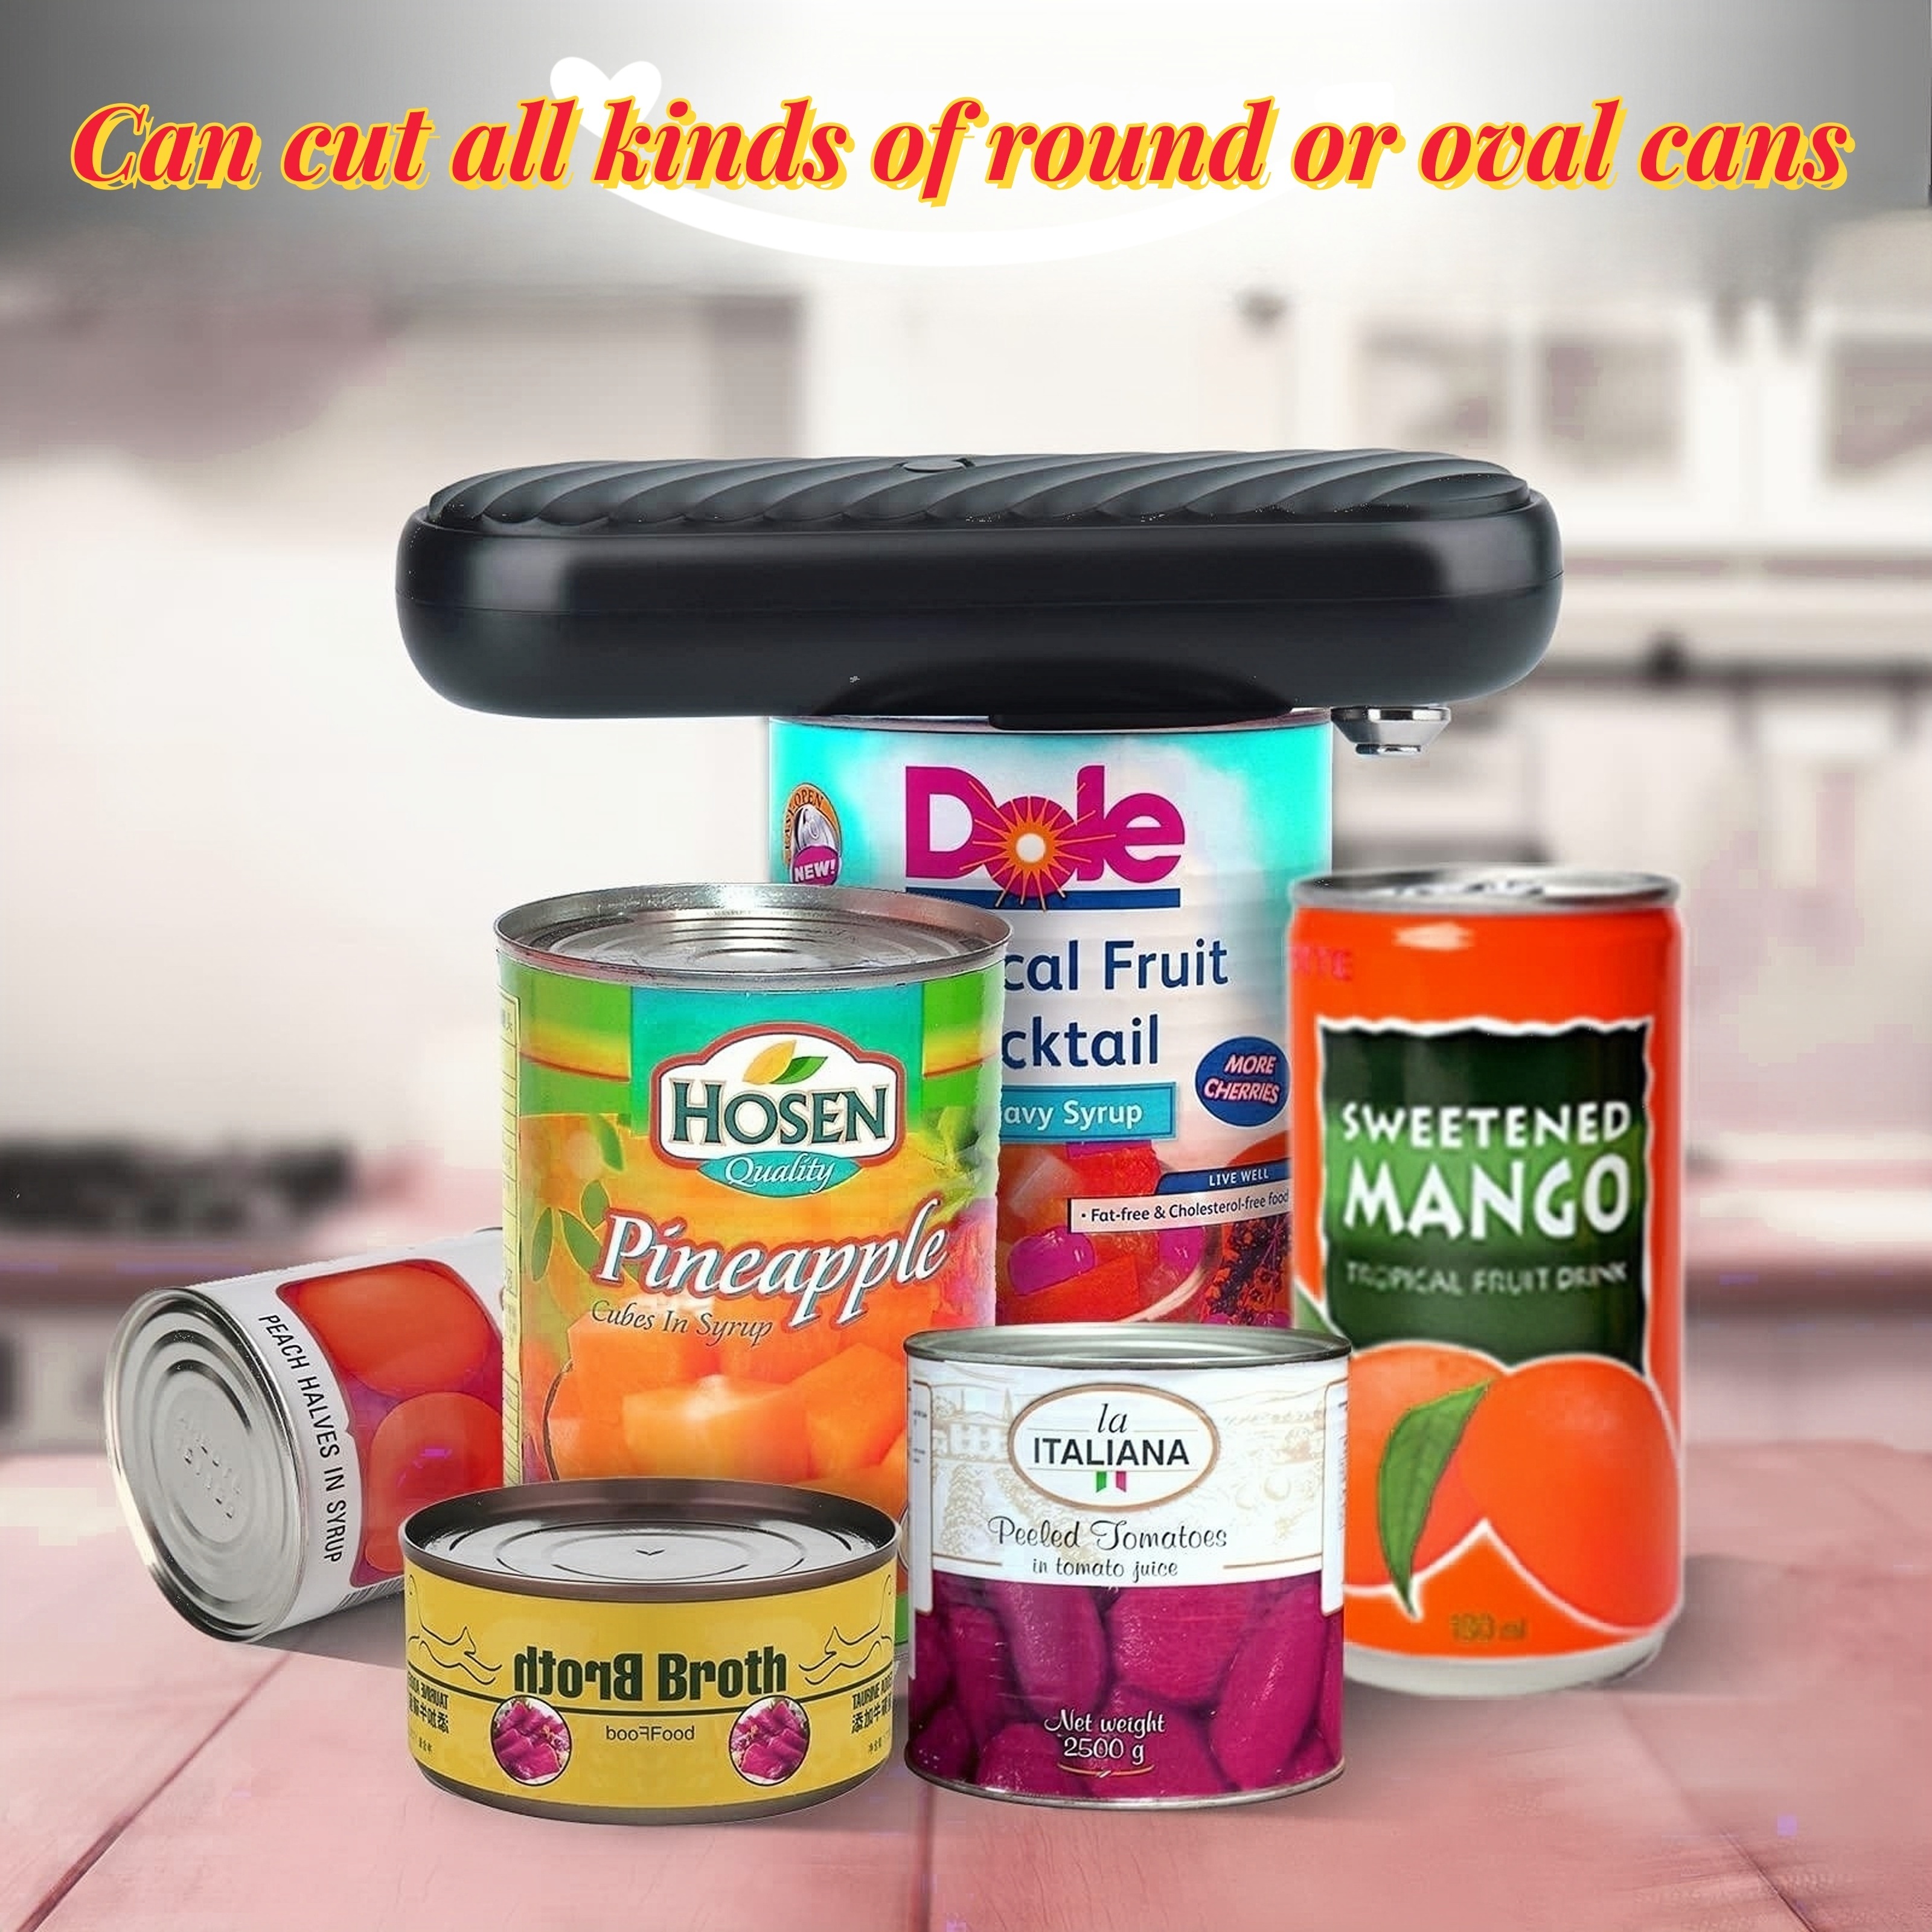 Rechargeable Electric Can Opener With Replaceable Blade - Smooth